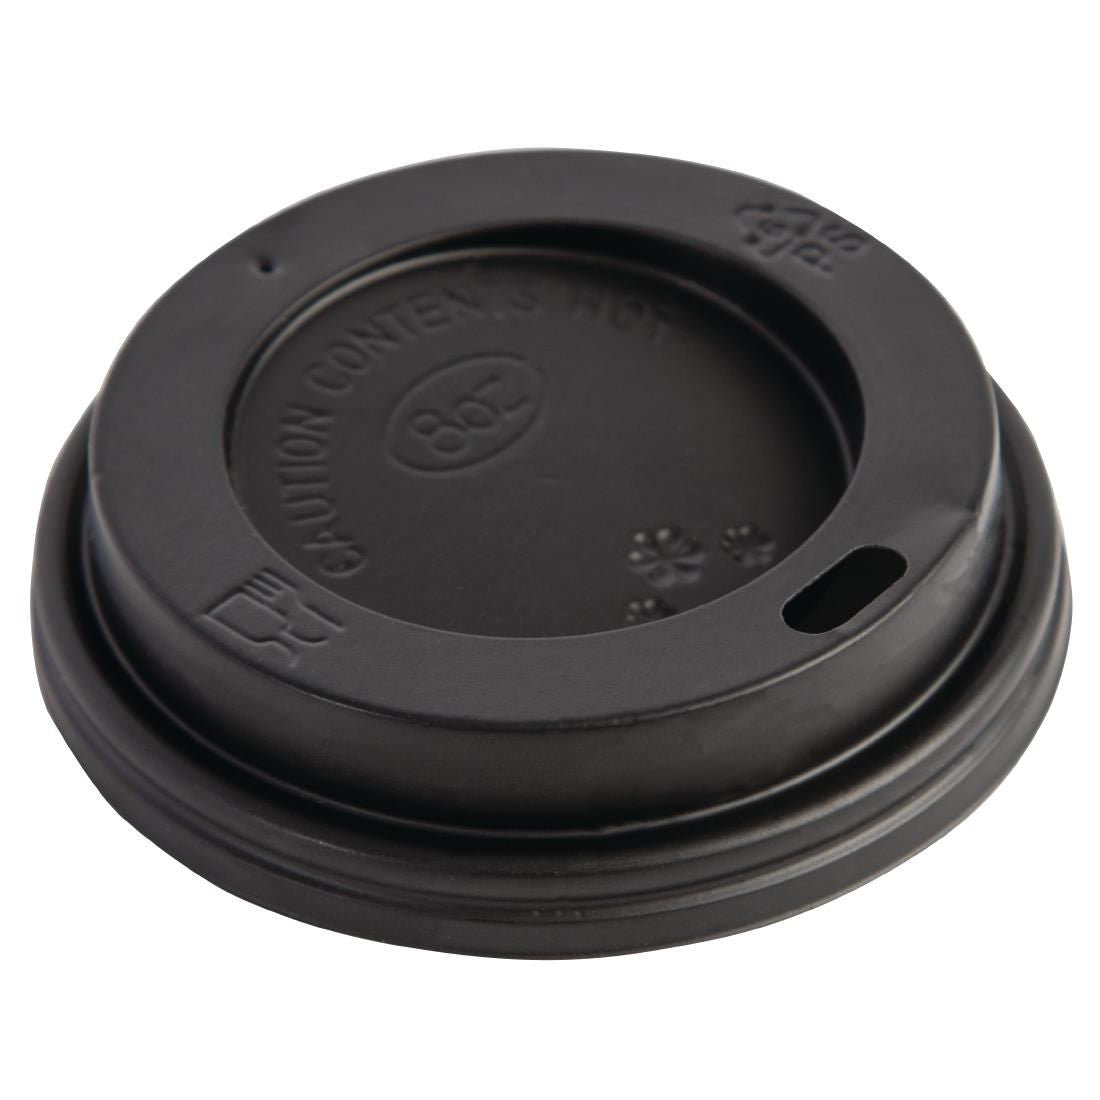 Fiesta Disposable Coffee Cup Lids Black 225ml / 8oz (Pack of 50) - CW715